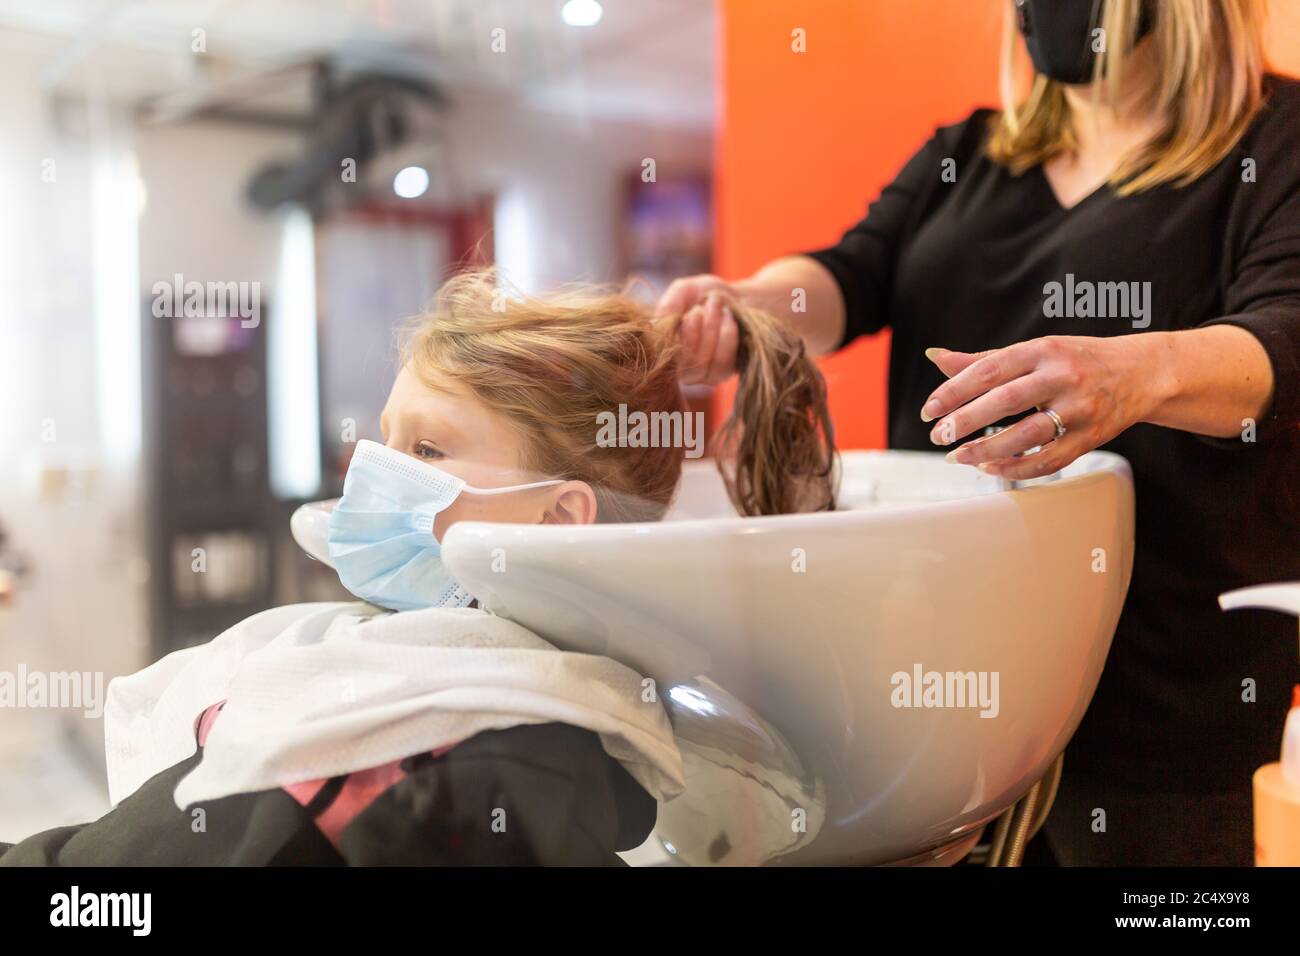 Girl having her hair washed in a hairdressing salon, wearing face masks after lockdown easing, UK Stock Photo